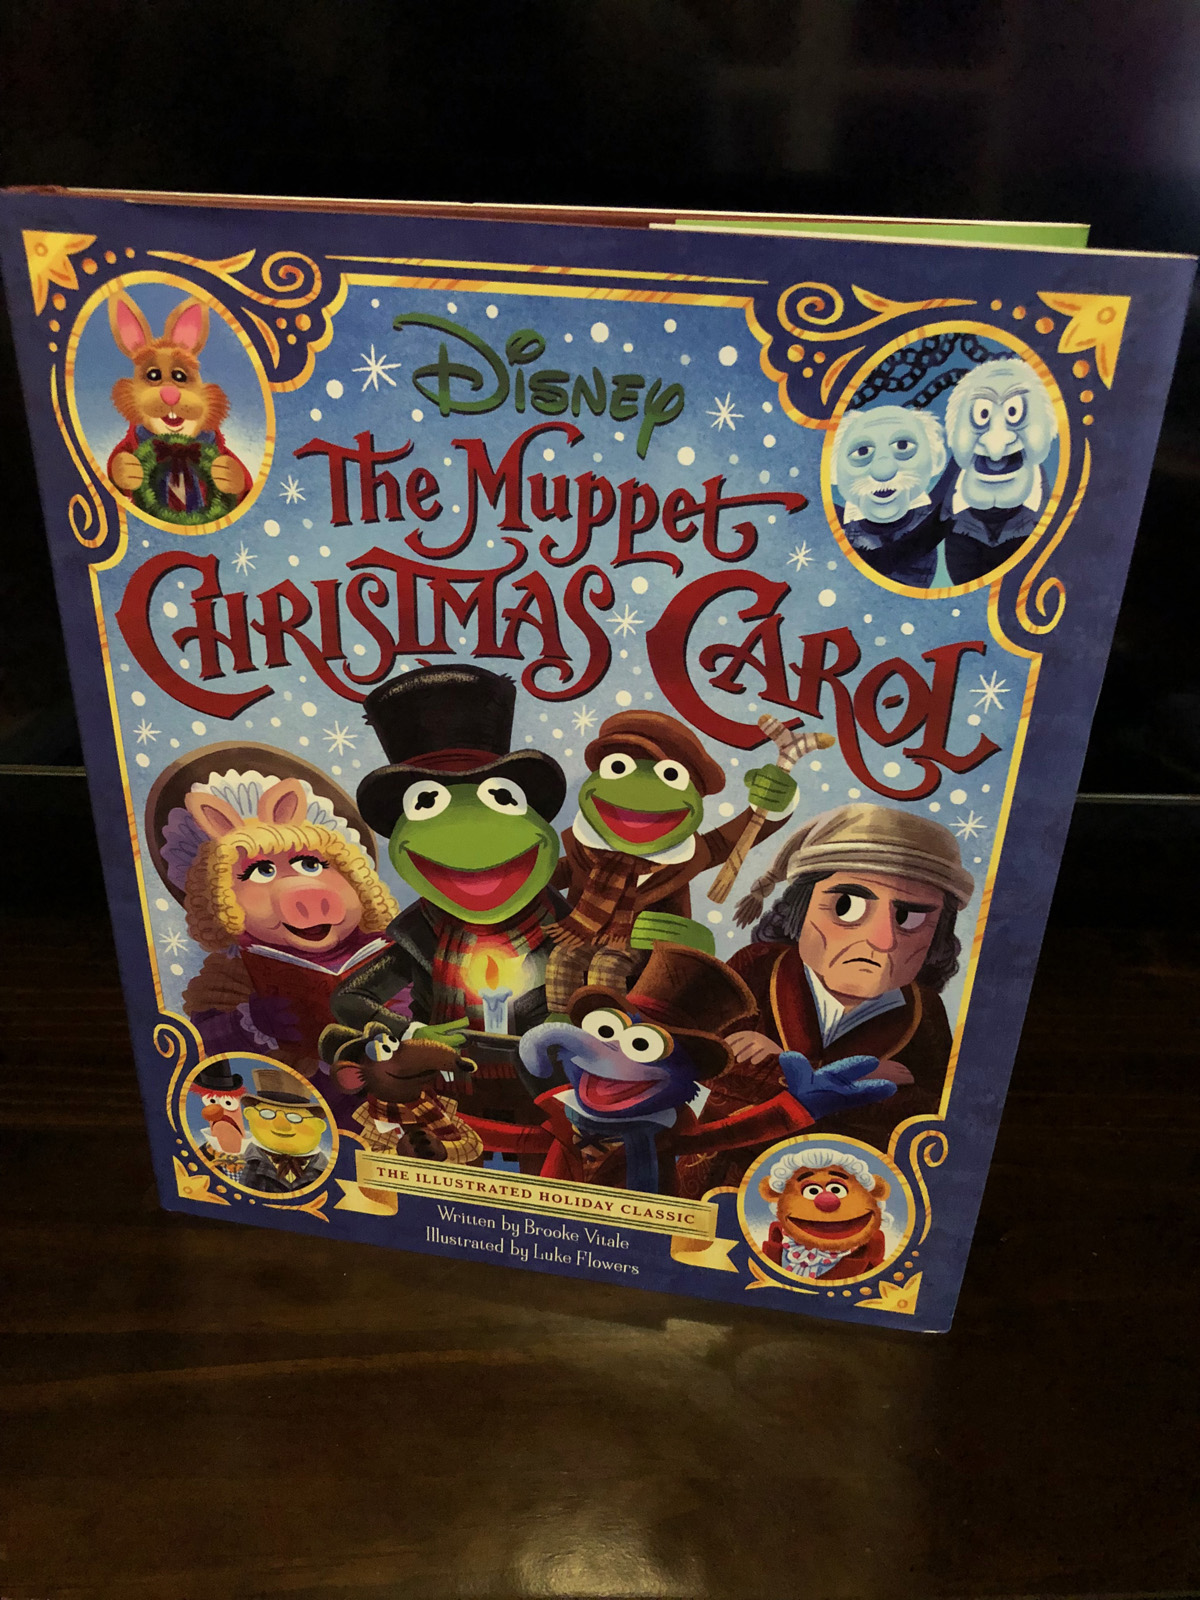 Muppet Christmas Carol: The Illustrated Holiday Classic